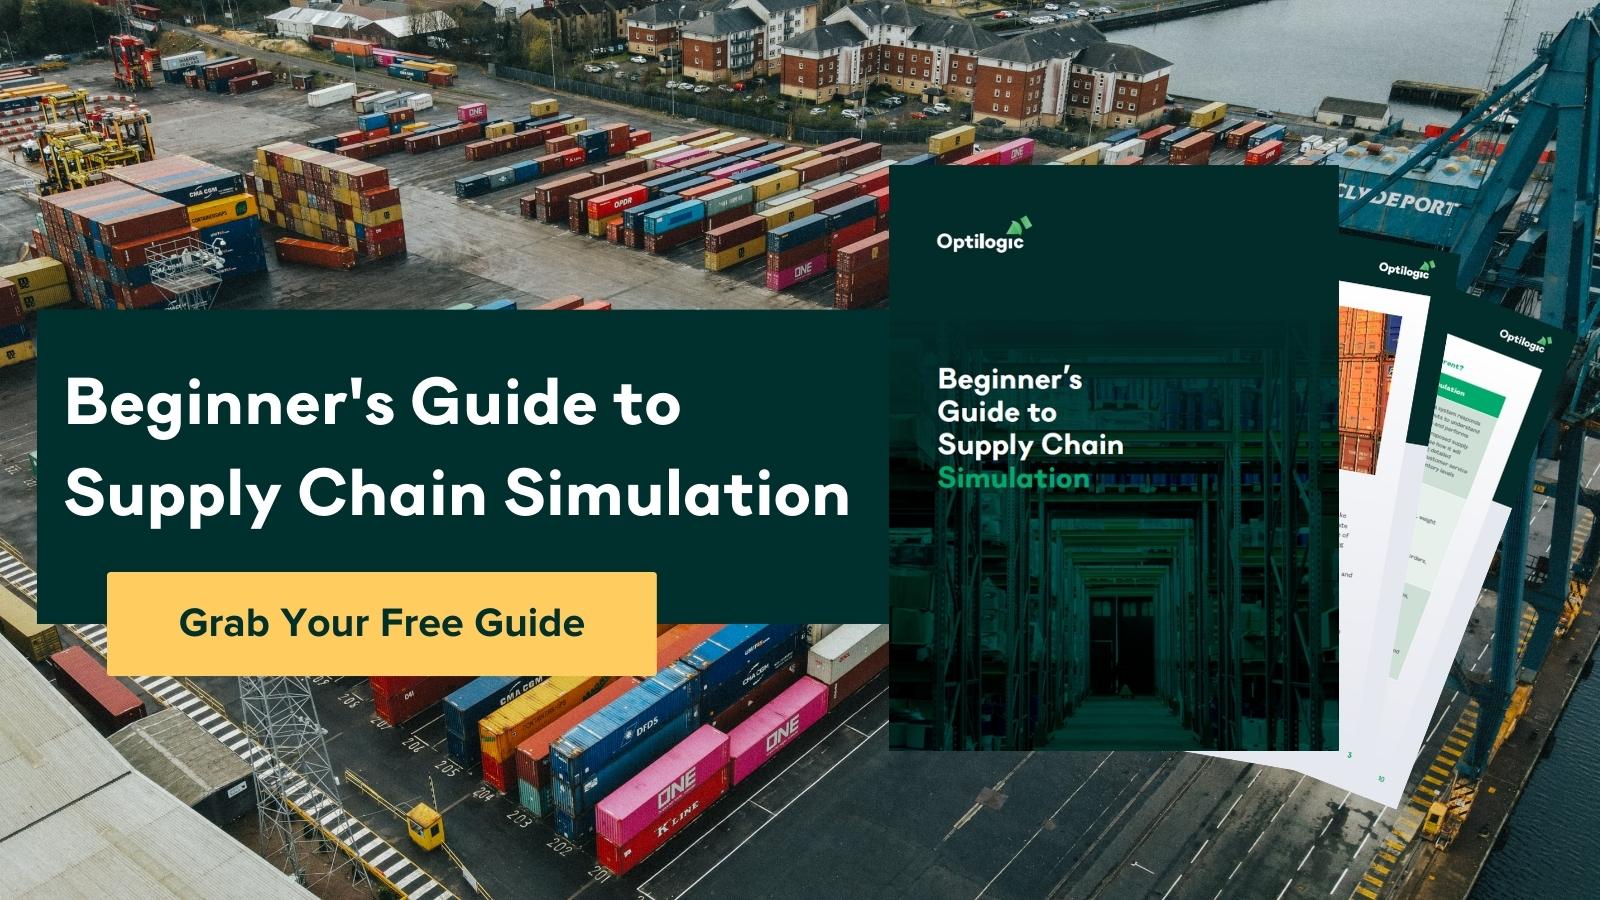 Beginner's Guide to Supply Chain Simulation